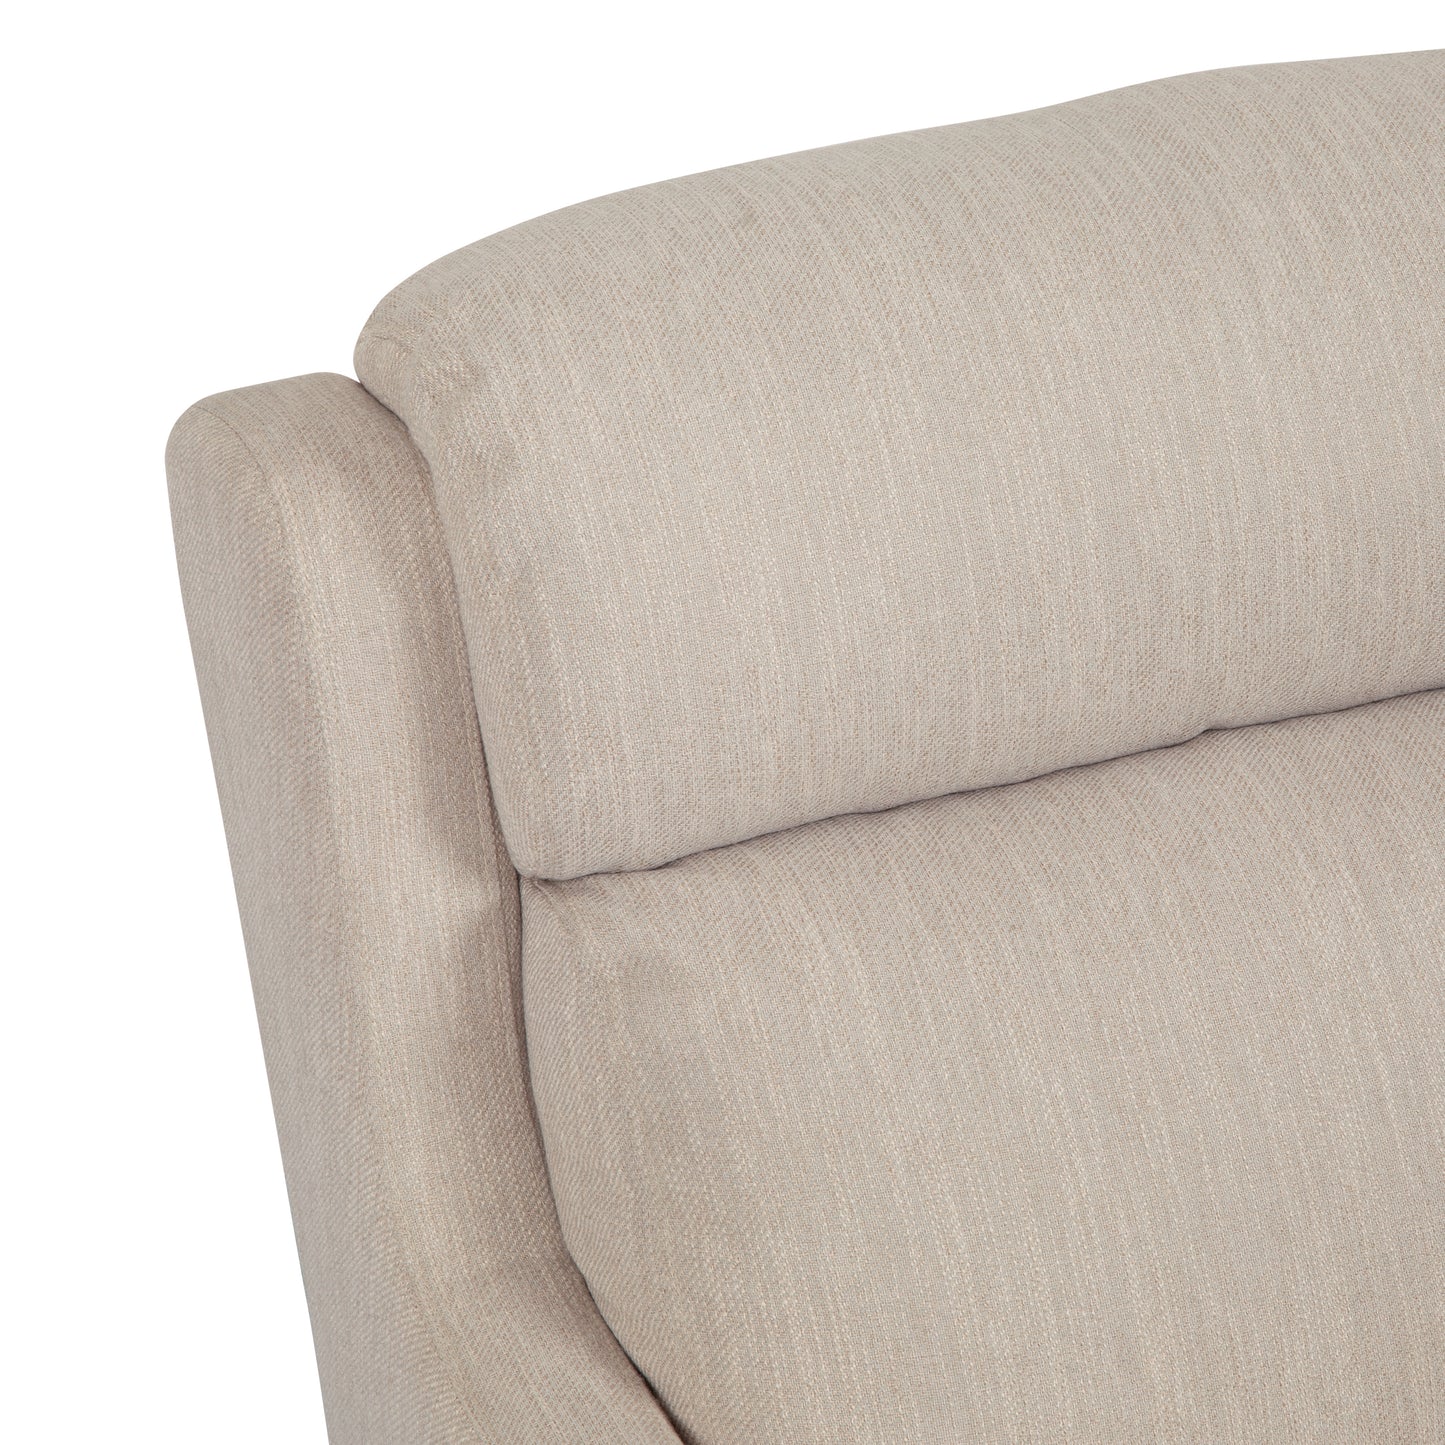 Baden Contemporary Pillow Tufted Fabric Club Chair